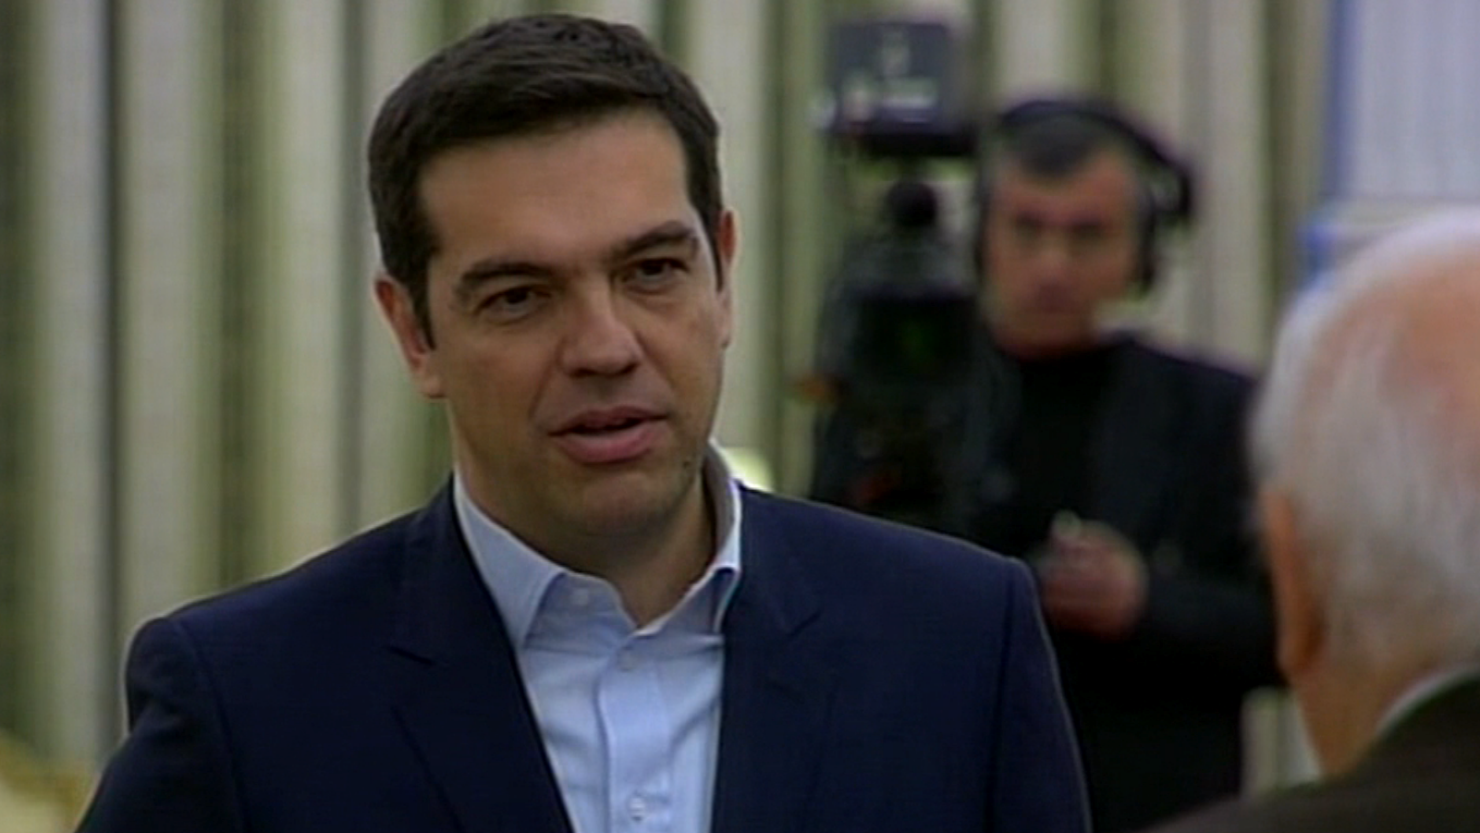 Prime Minister Alexis Tsipras: "If our partners keep insisting on austerity, the debt will only continue to grow."